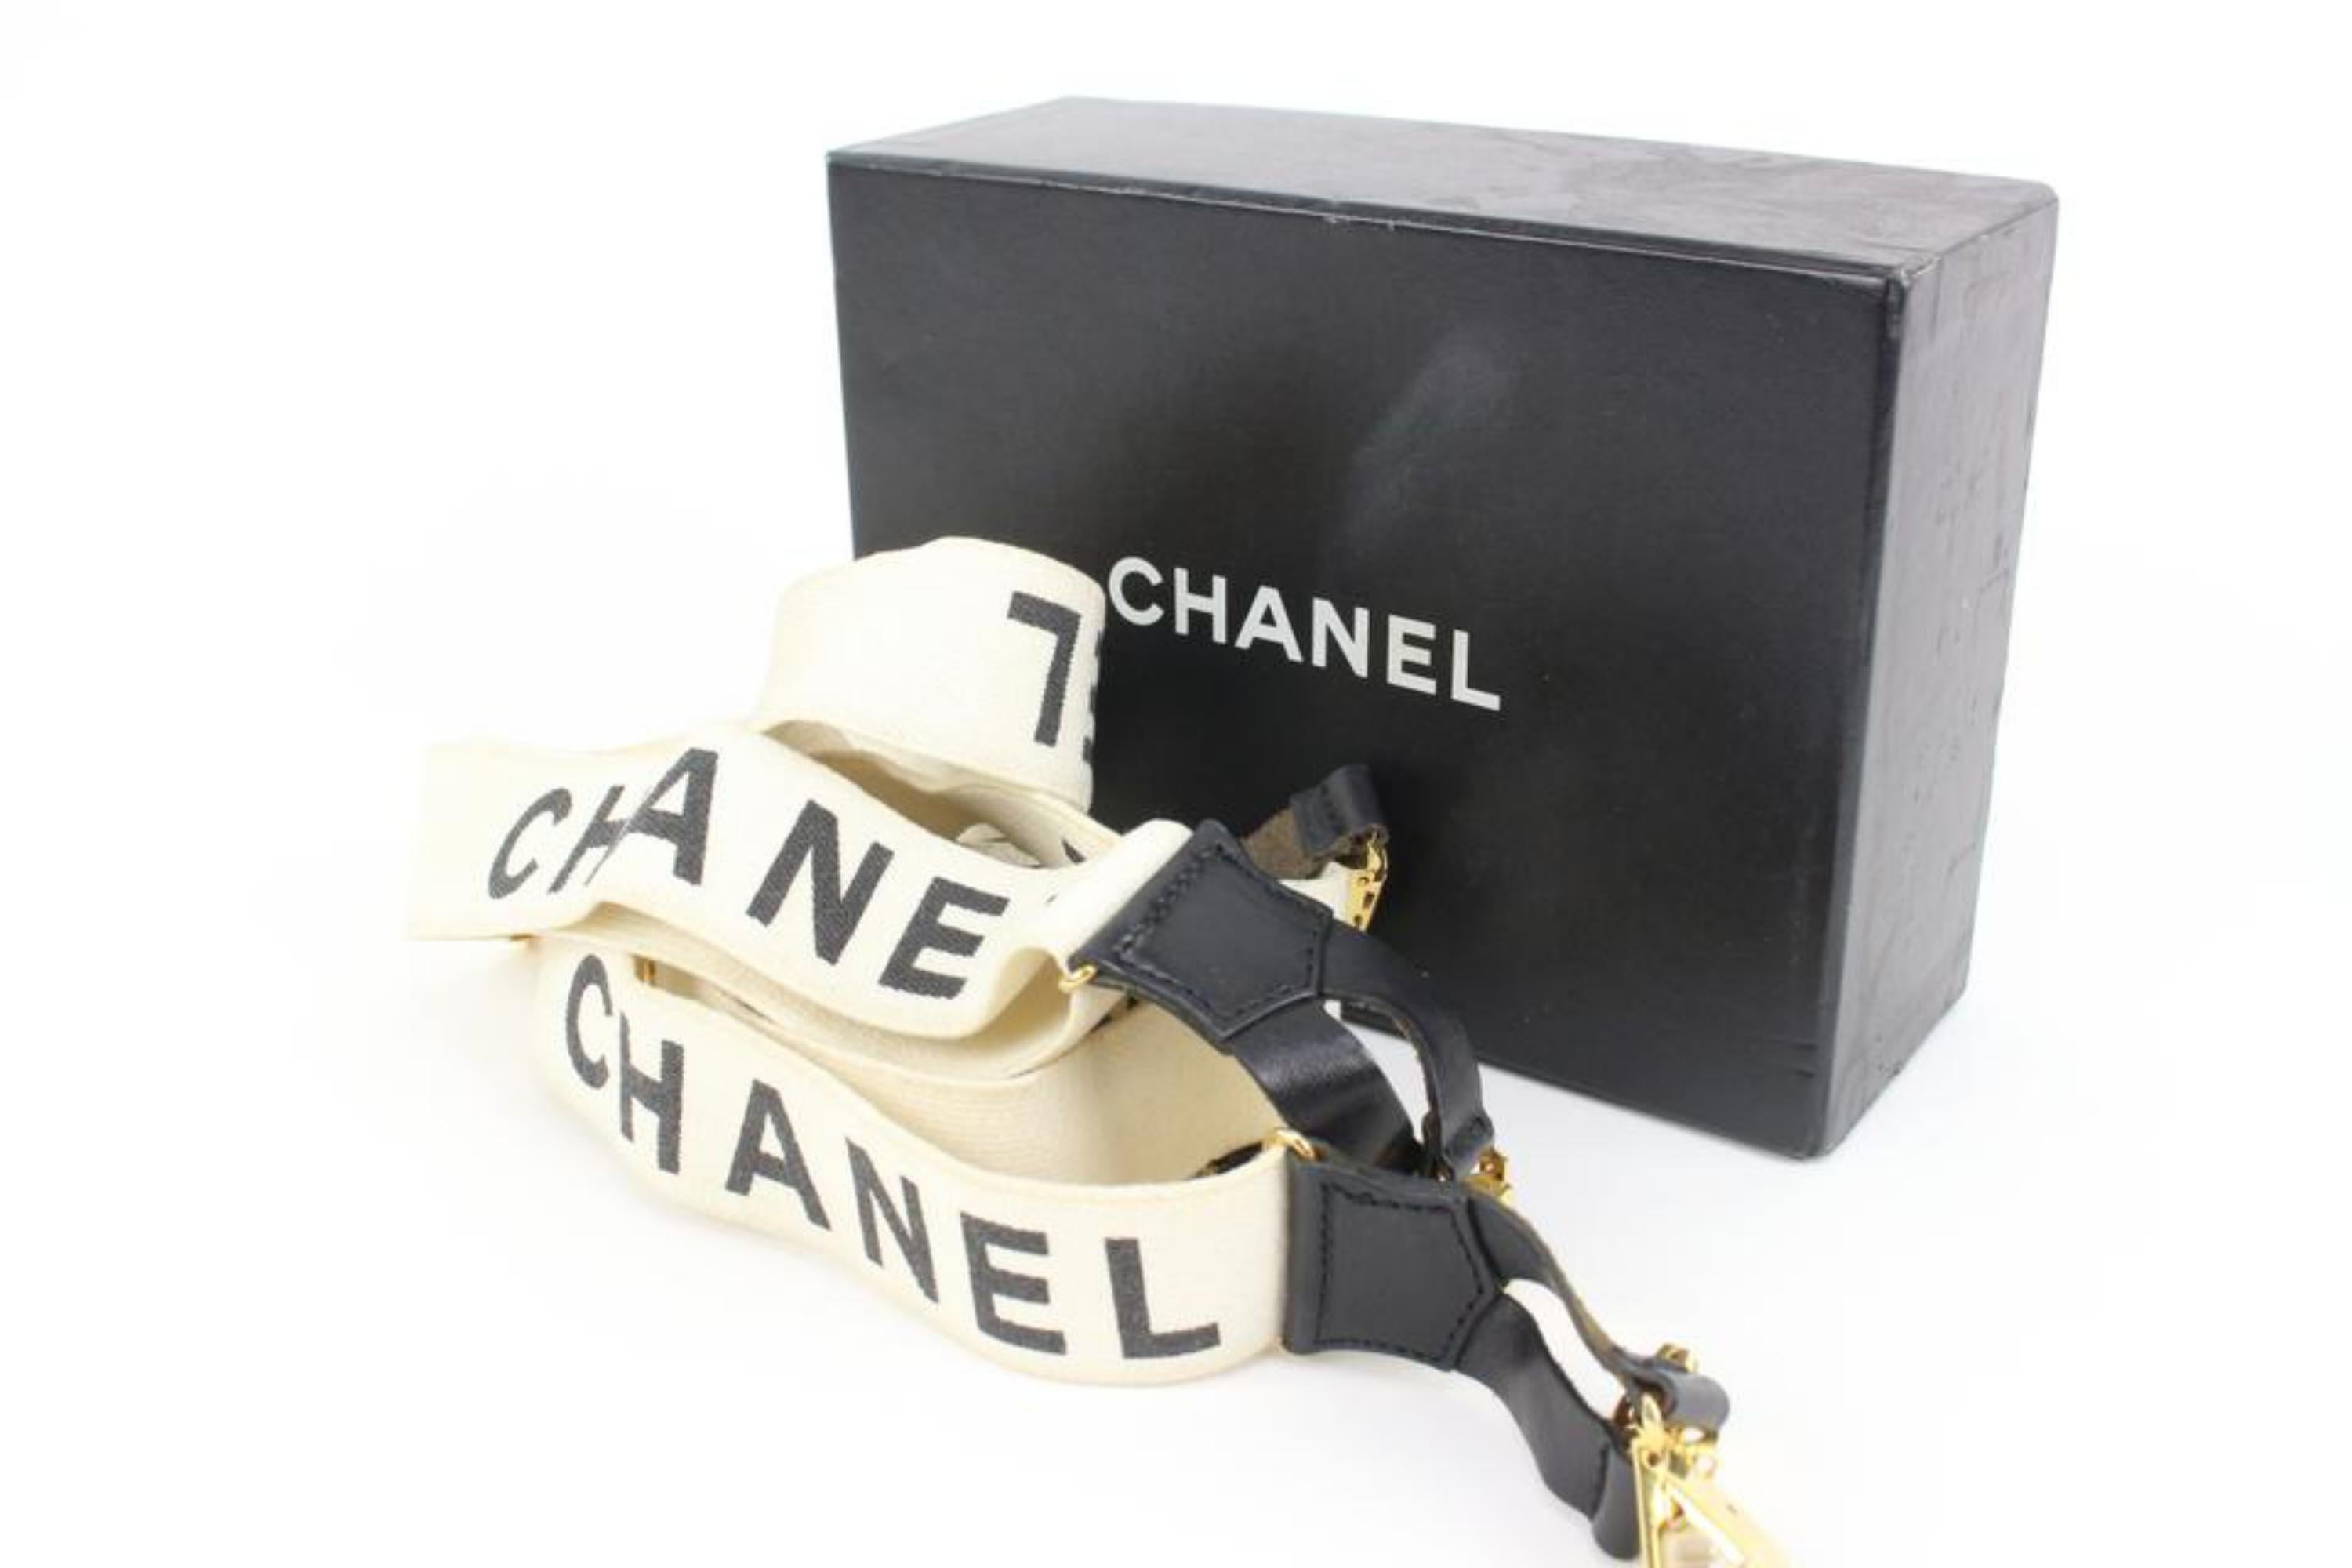 Chanel 1997 White CC Logo Suspenders 61ck322s
Made In: France
Measurements: Length:  26.5